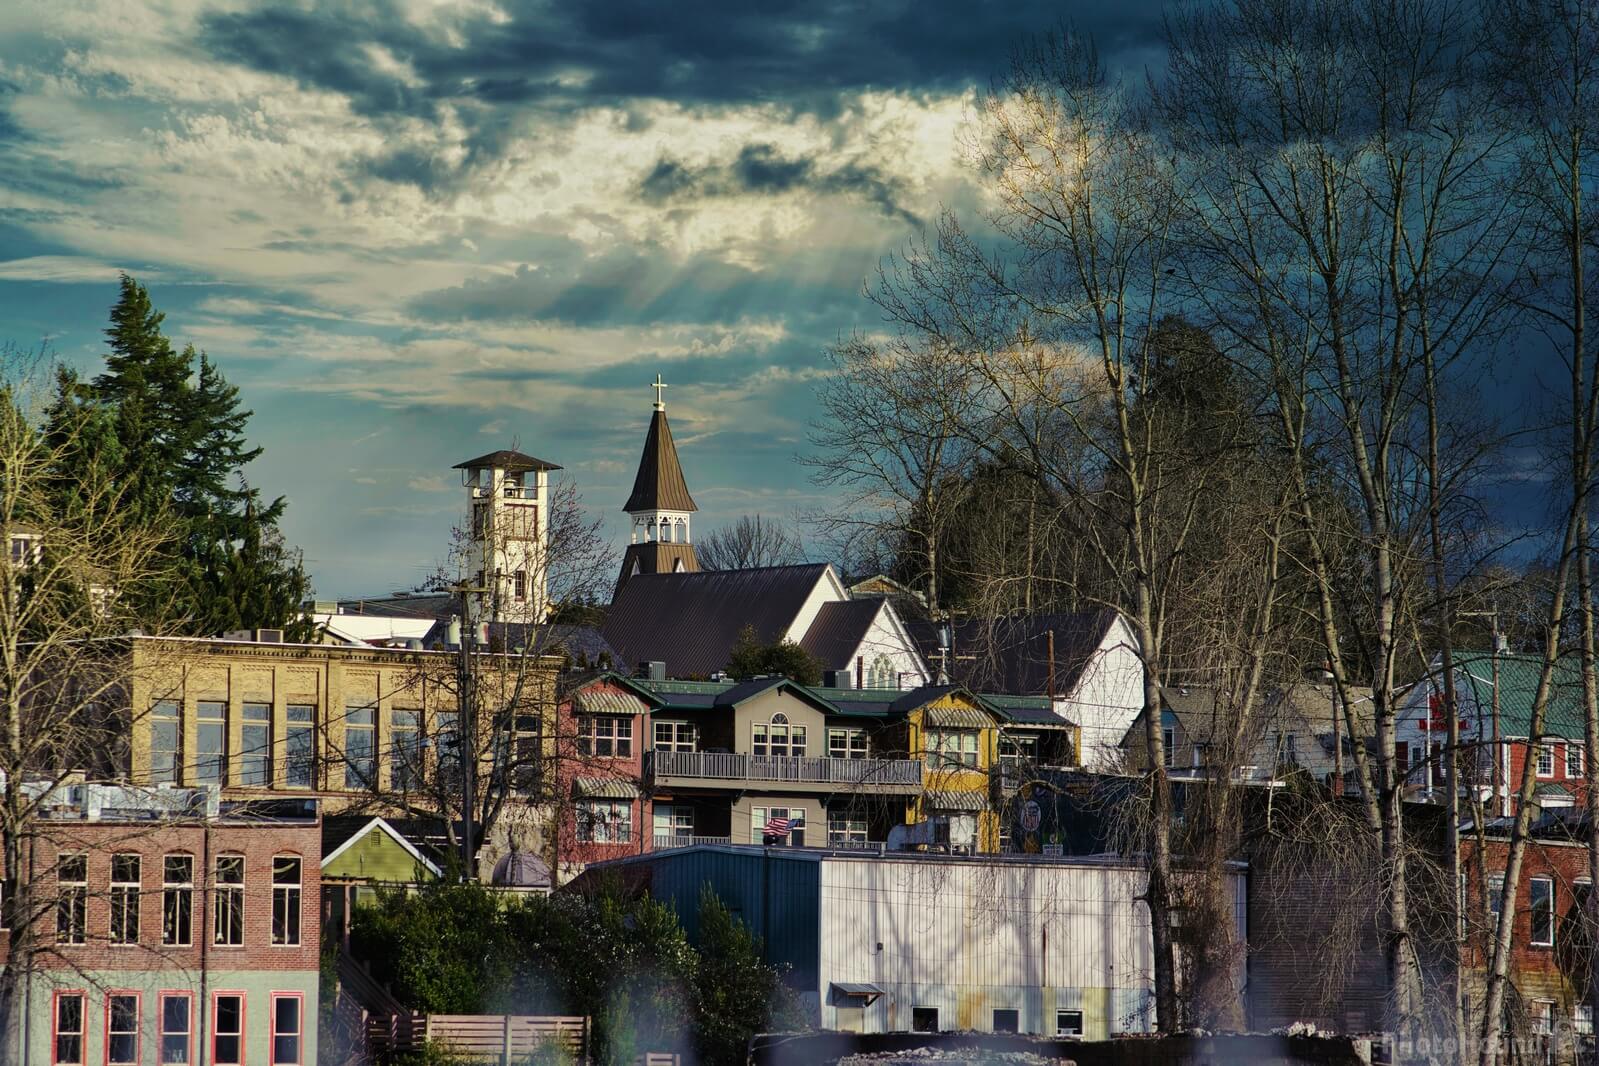 Image of Old Town Snohomish, Washington by Steve West